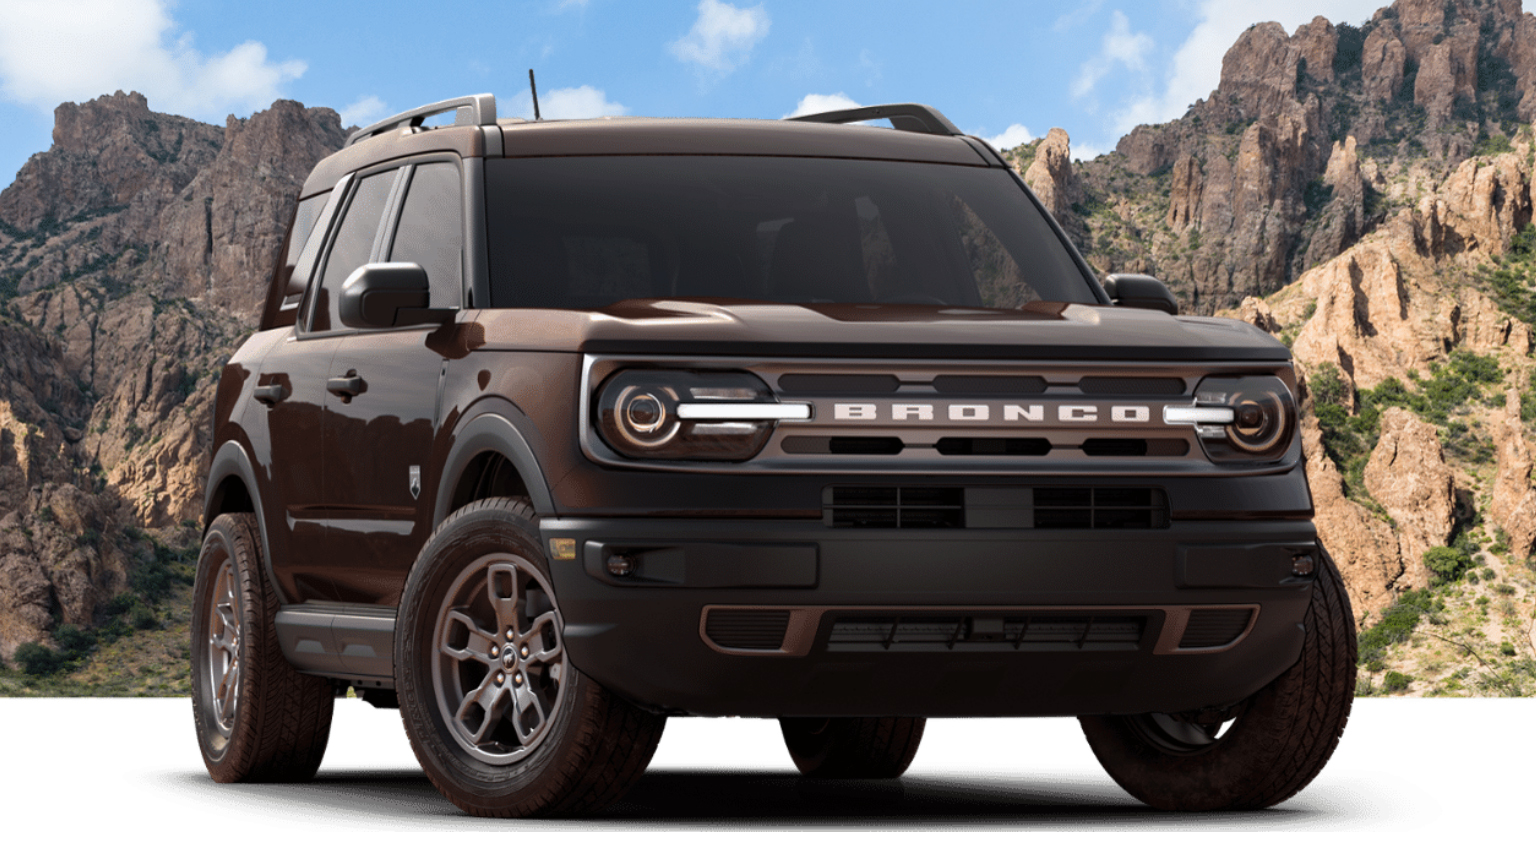 2021 Ford Bronco Sport pricing revealed, starts at $28,000